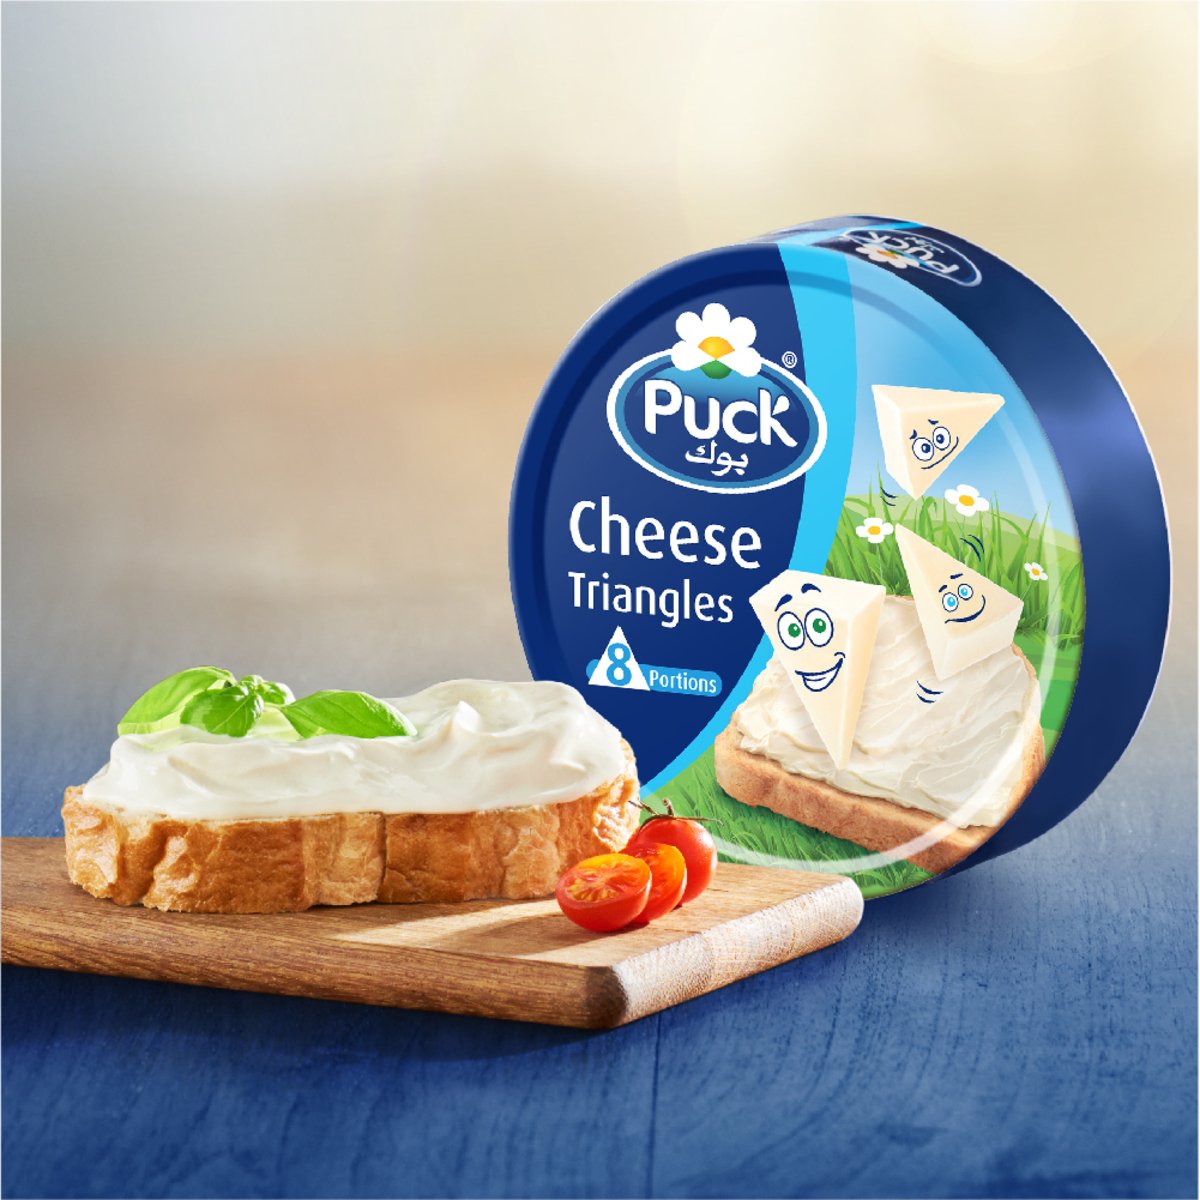 Puck Cheese Triangles 24 Portions 360g